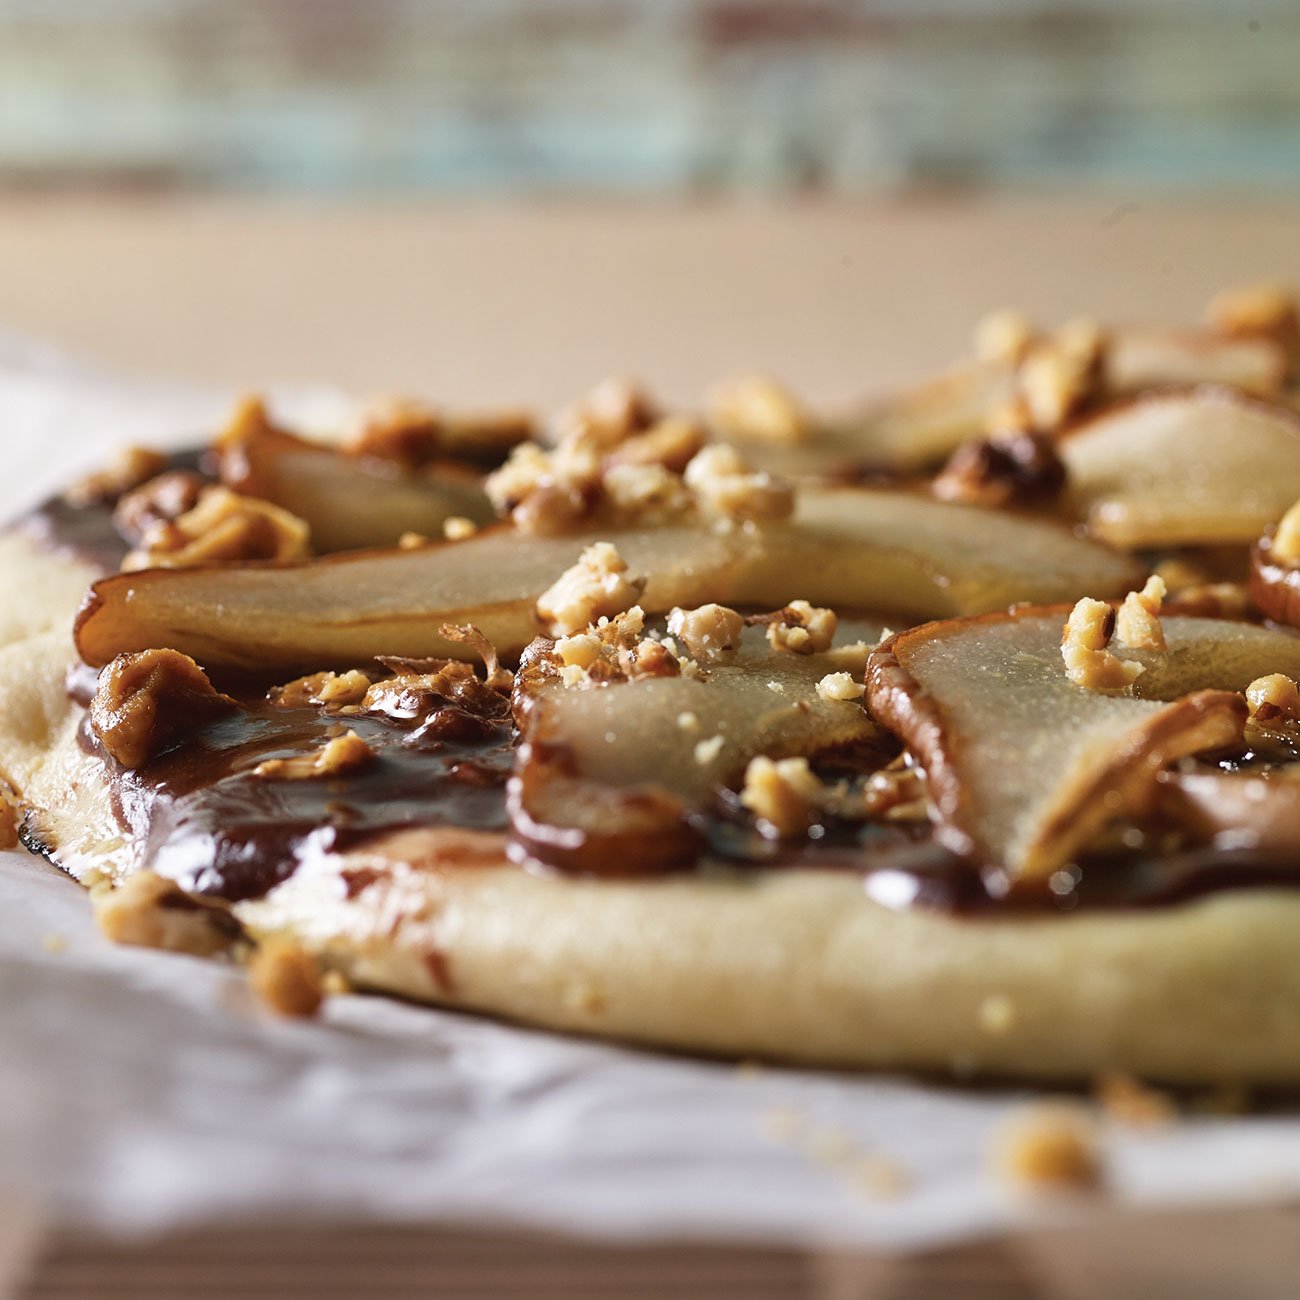 Roasted Pear Pizza with Nutella and Mascarpone